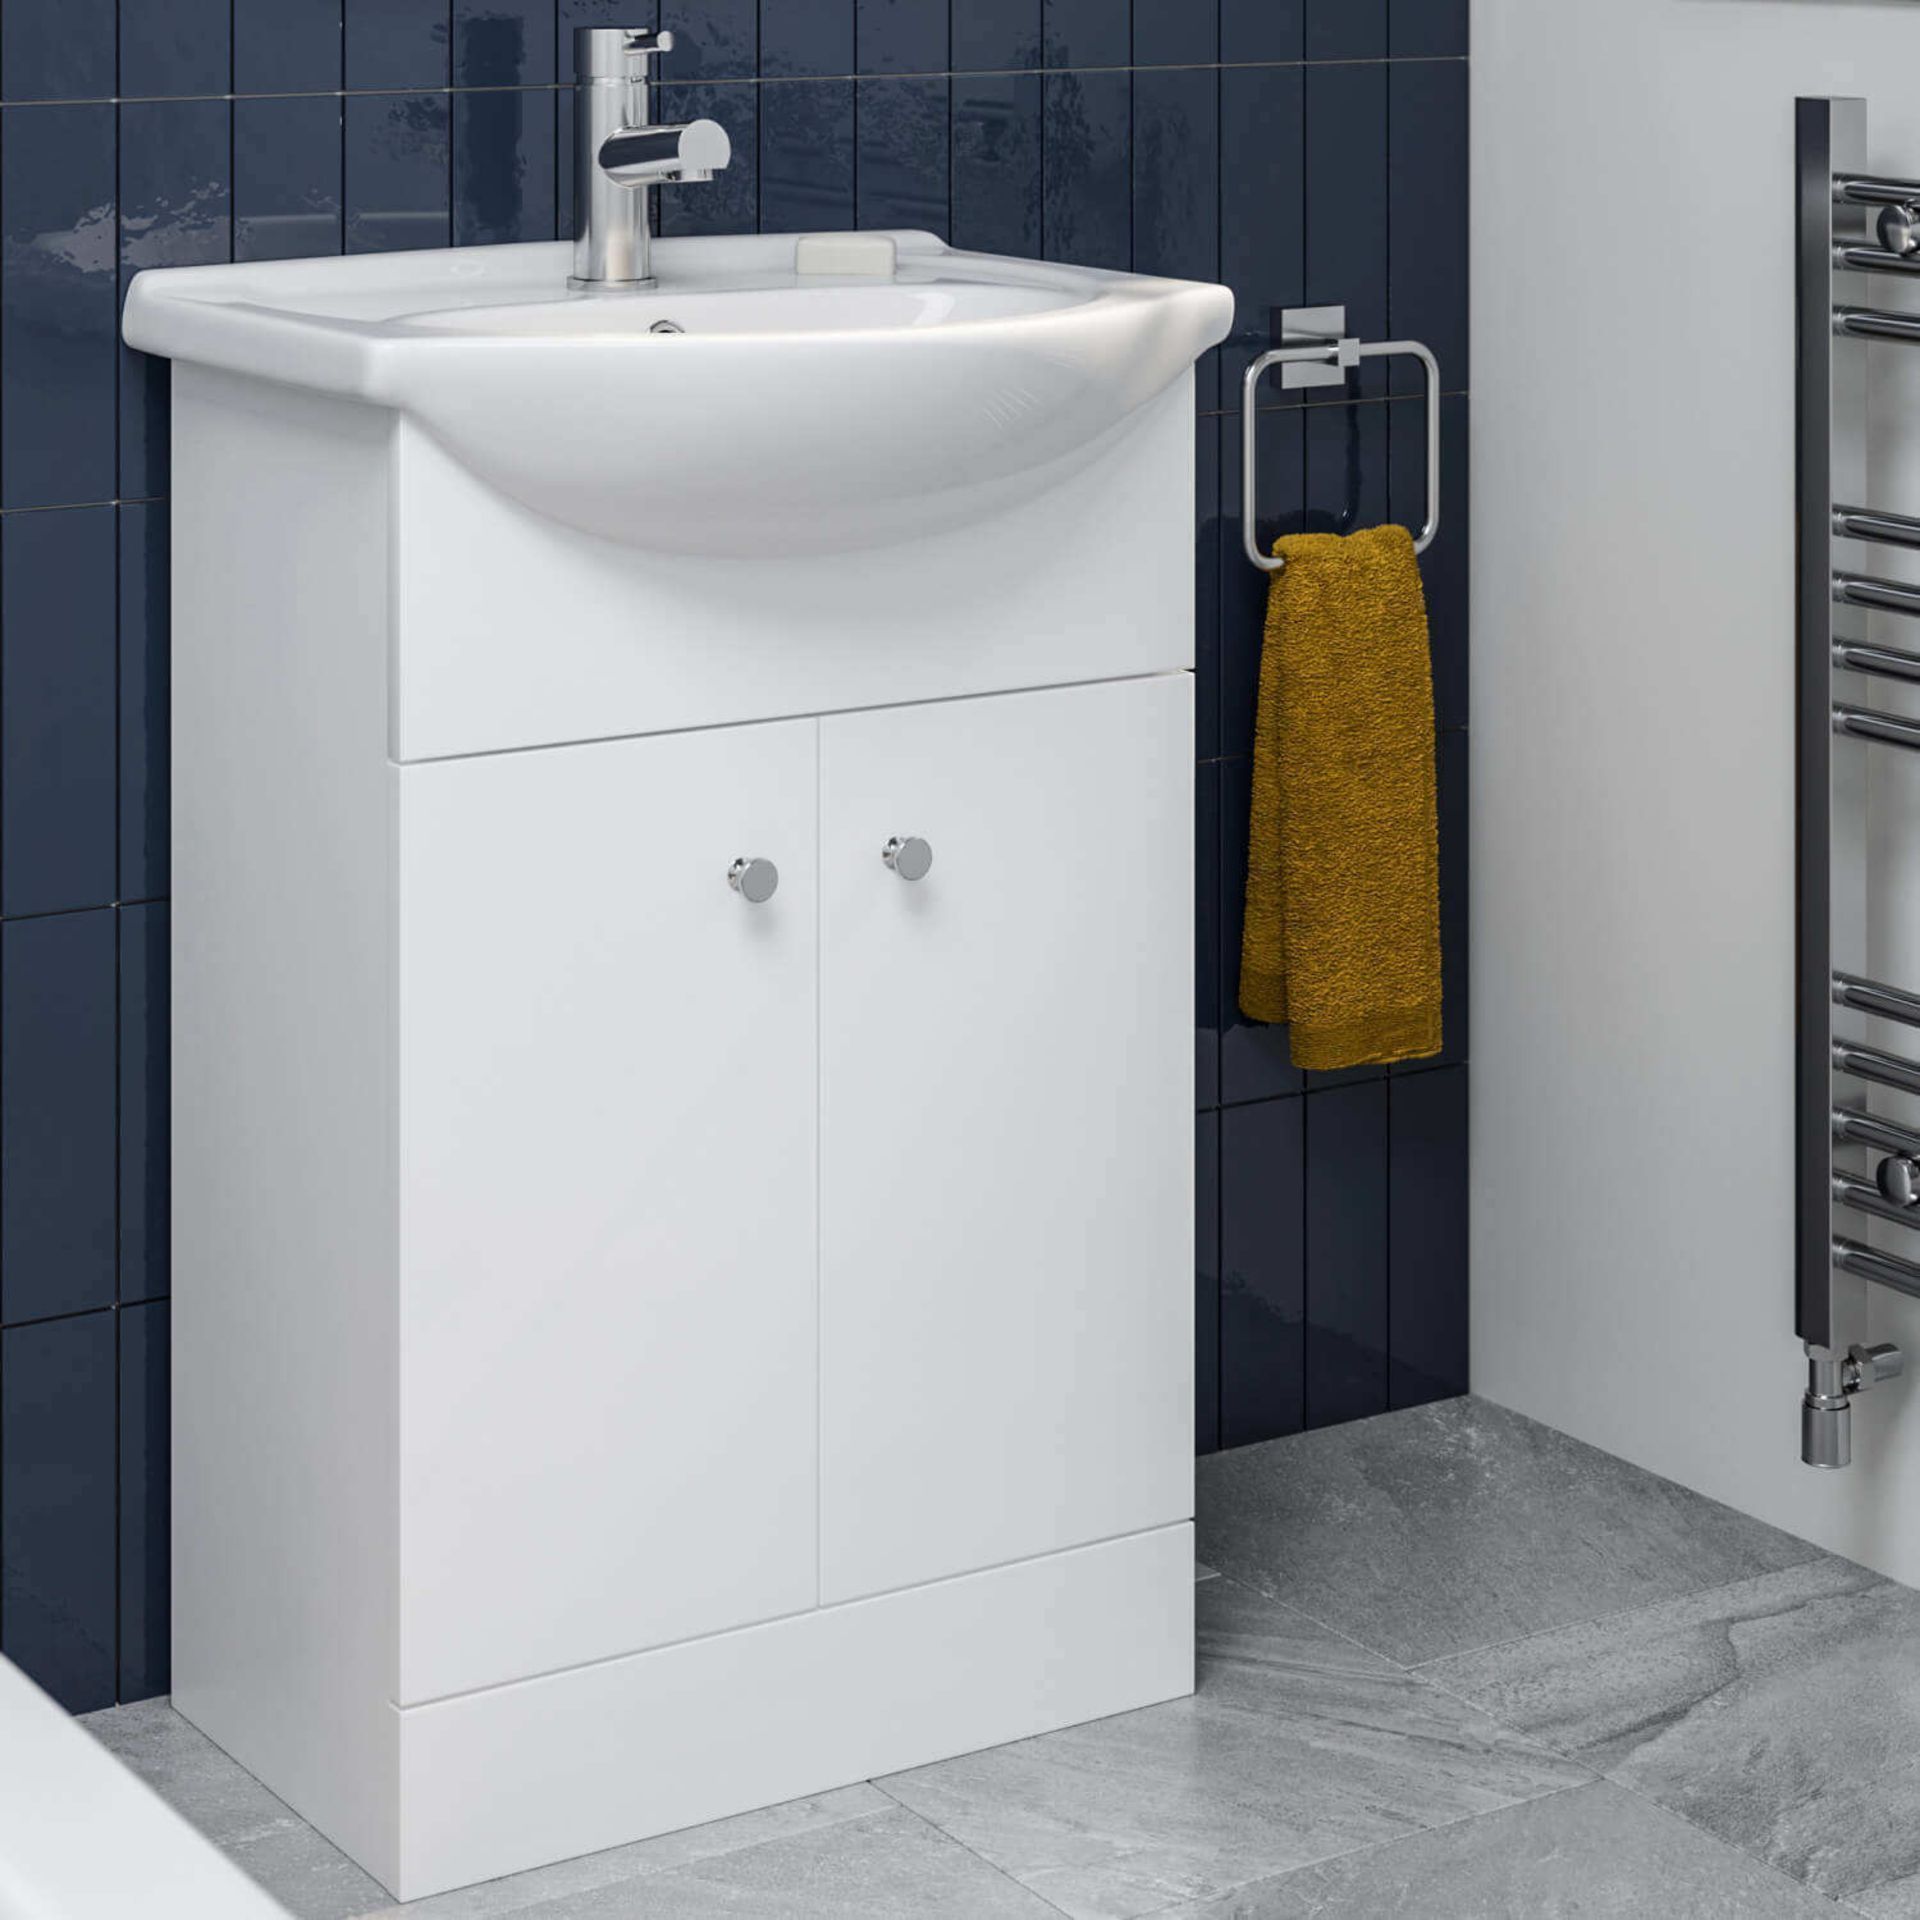 New & Boxed 550mm Quartz Basin Sink Vanity Unit Floor Standing White.Rrp £349.99 Each.Comes Co... - Image 2 of 3